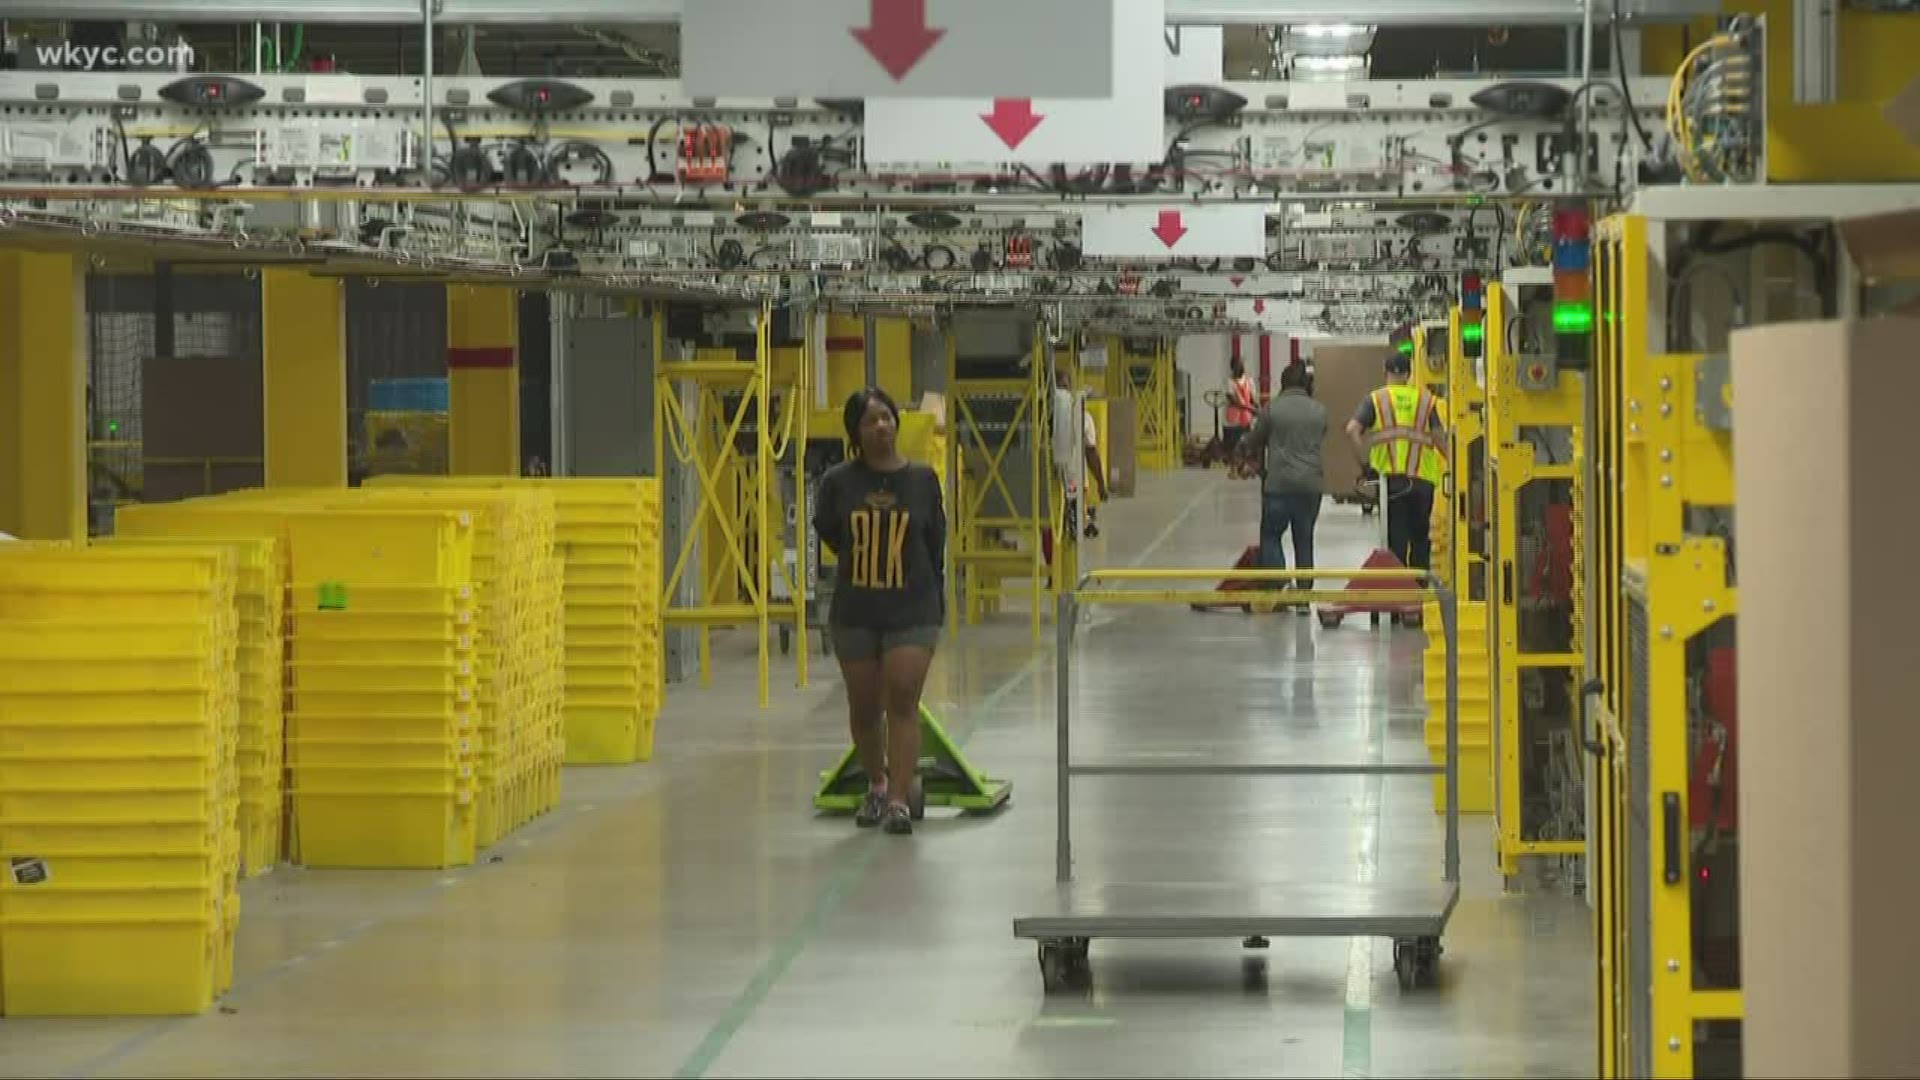 Amazon opened the doors of its high-tech fulfillment center to public officials and media on Thursday. It’s one six Amazon sorting centers in Ohio.